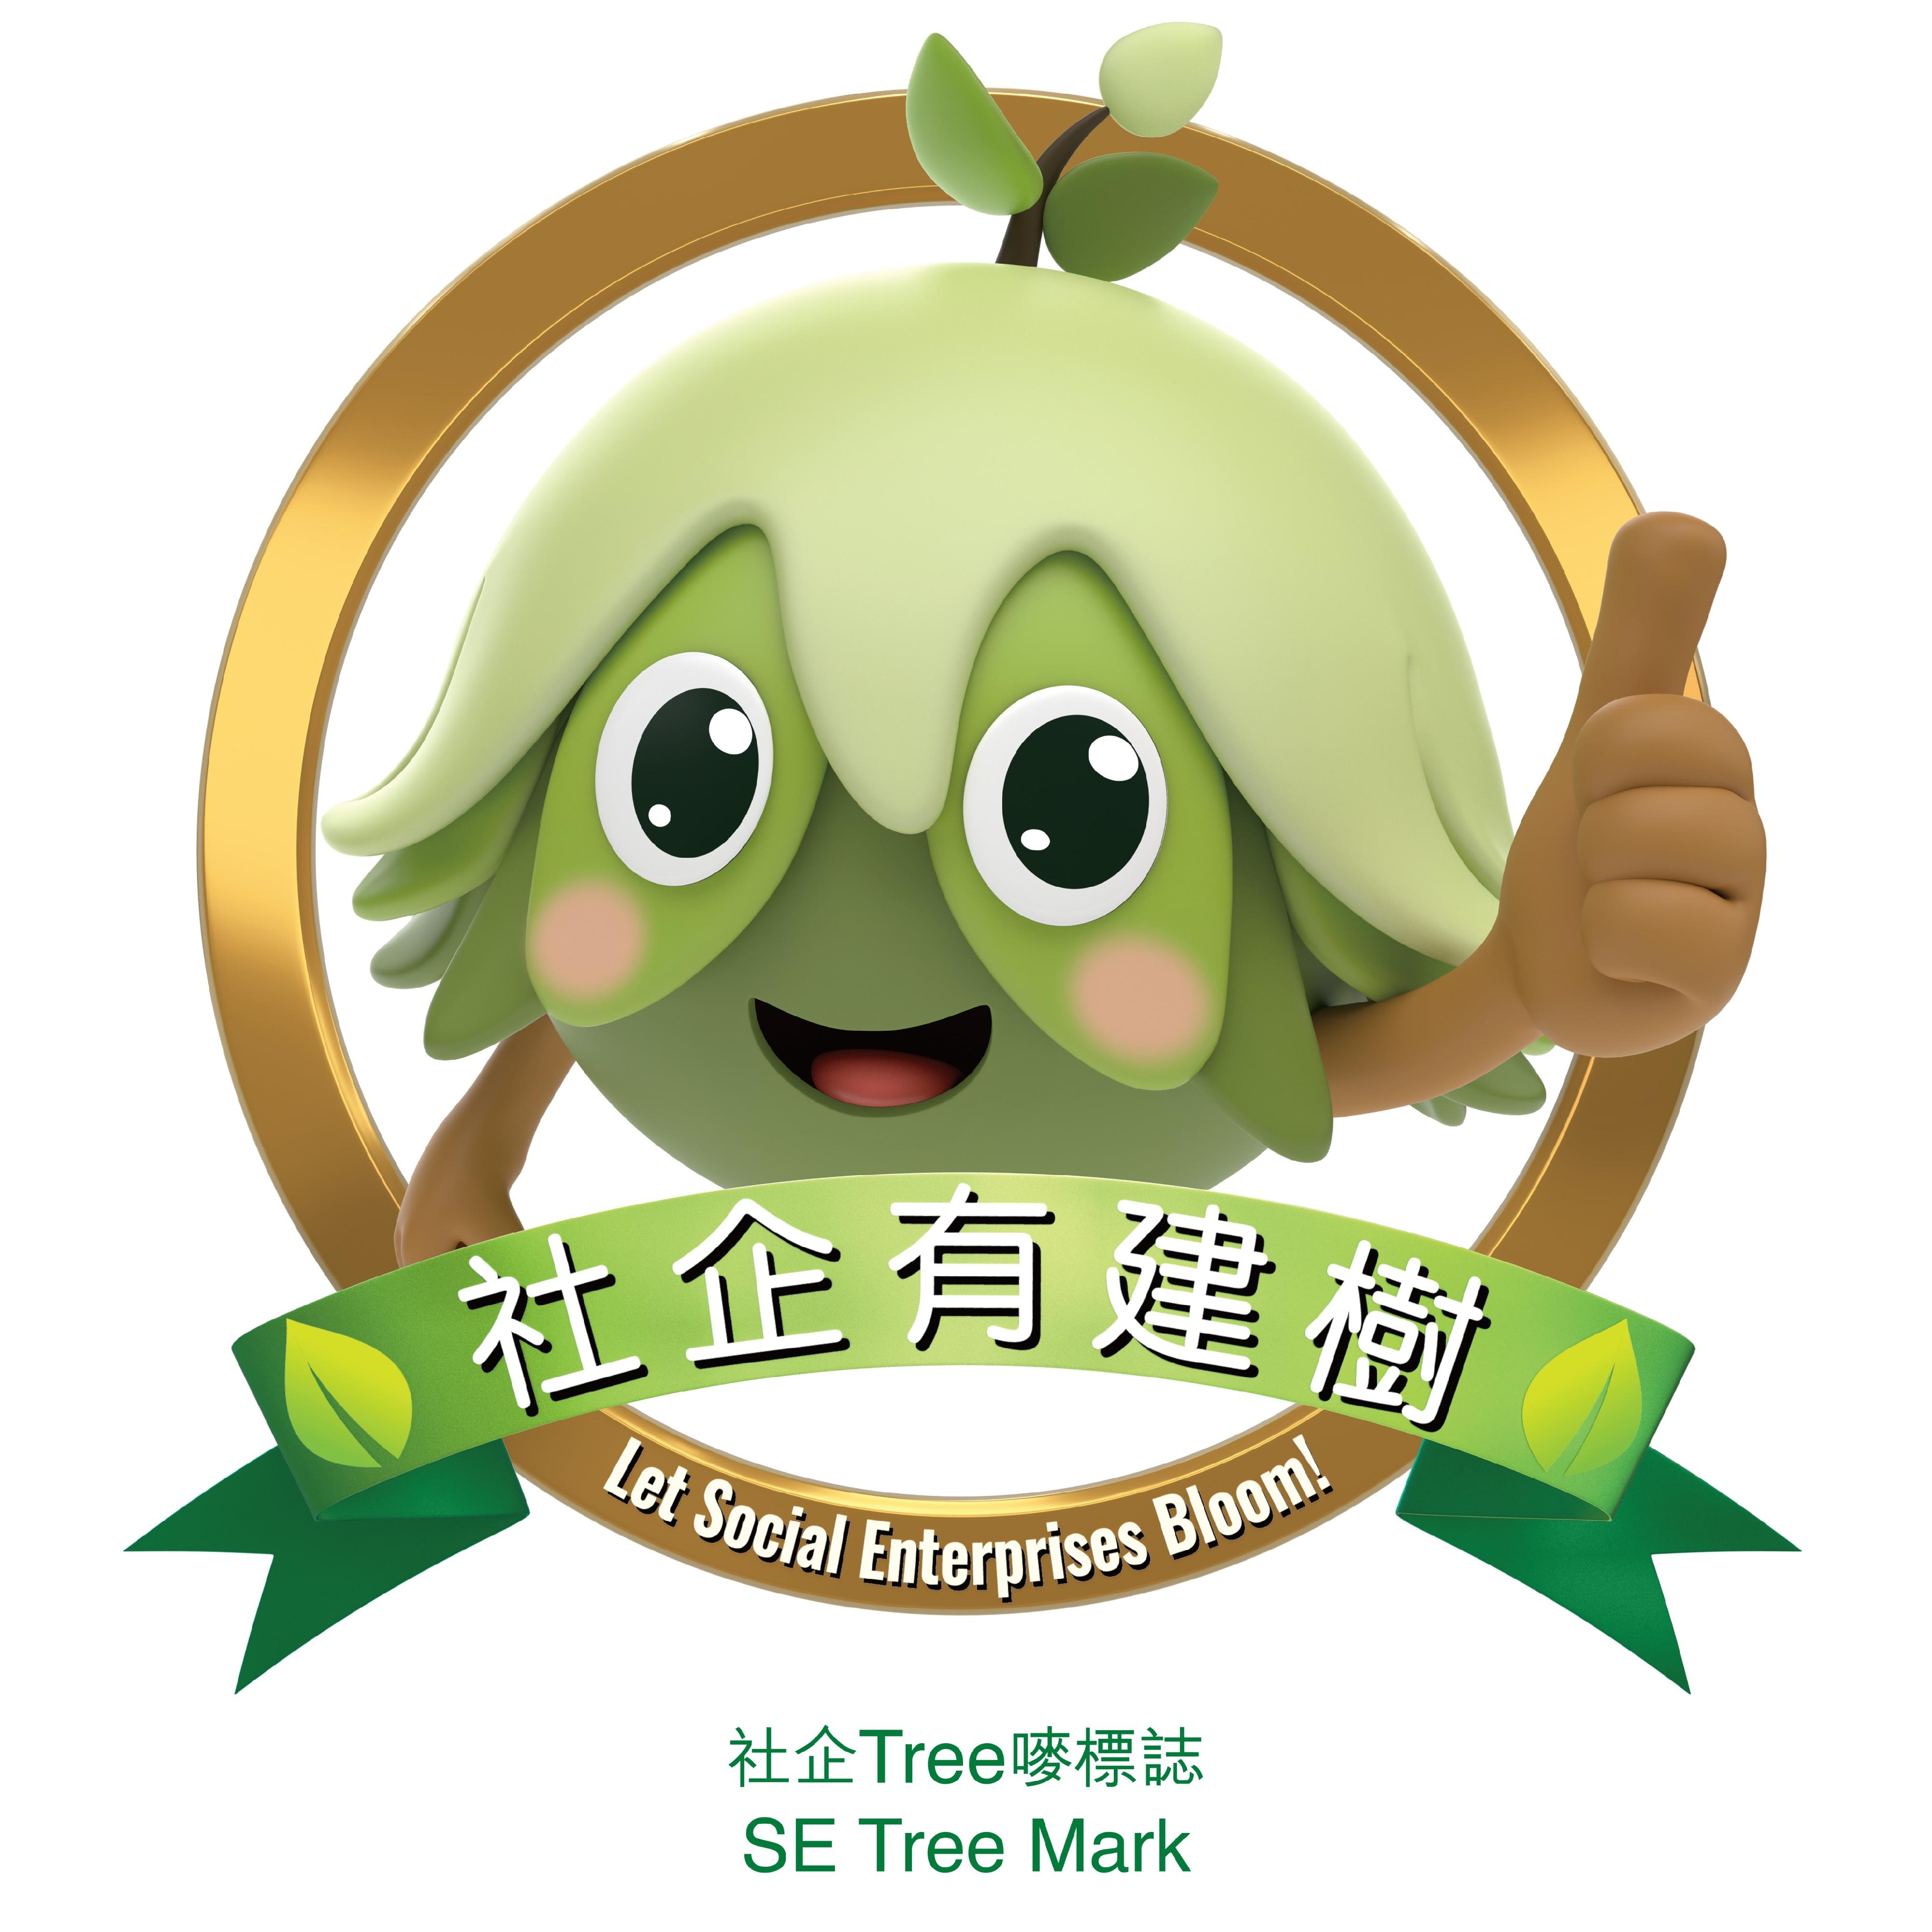 The Chief Secretary for Administration, Mr Chan Kwok-ki, unveiled the new social enterprise (SE) mascot, Bloomy the Tree, at the opening ceremony of the Social Enterprise Summit 2022 today (November 24). Photo shows the SE Tree Mark logo.